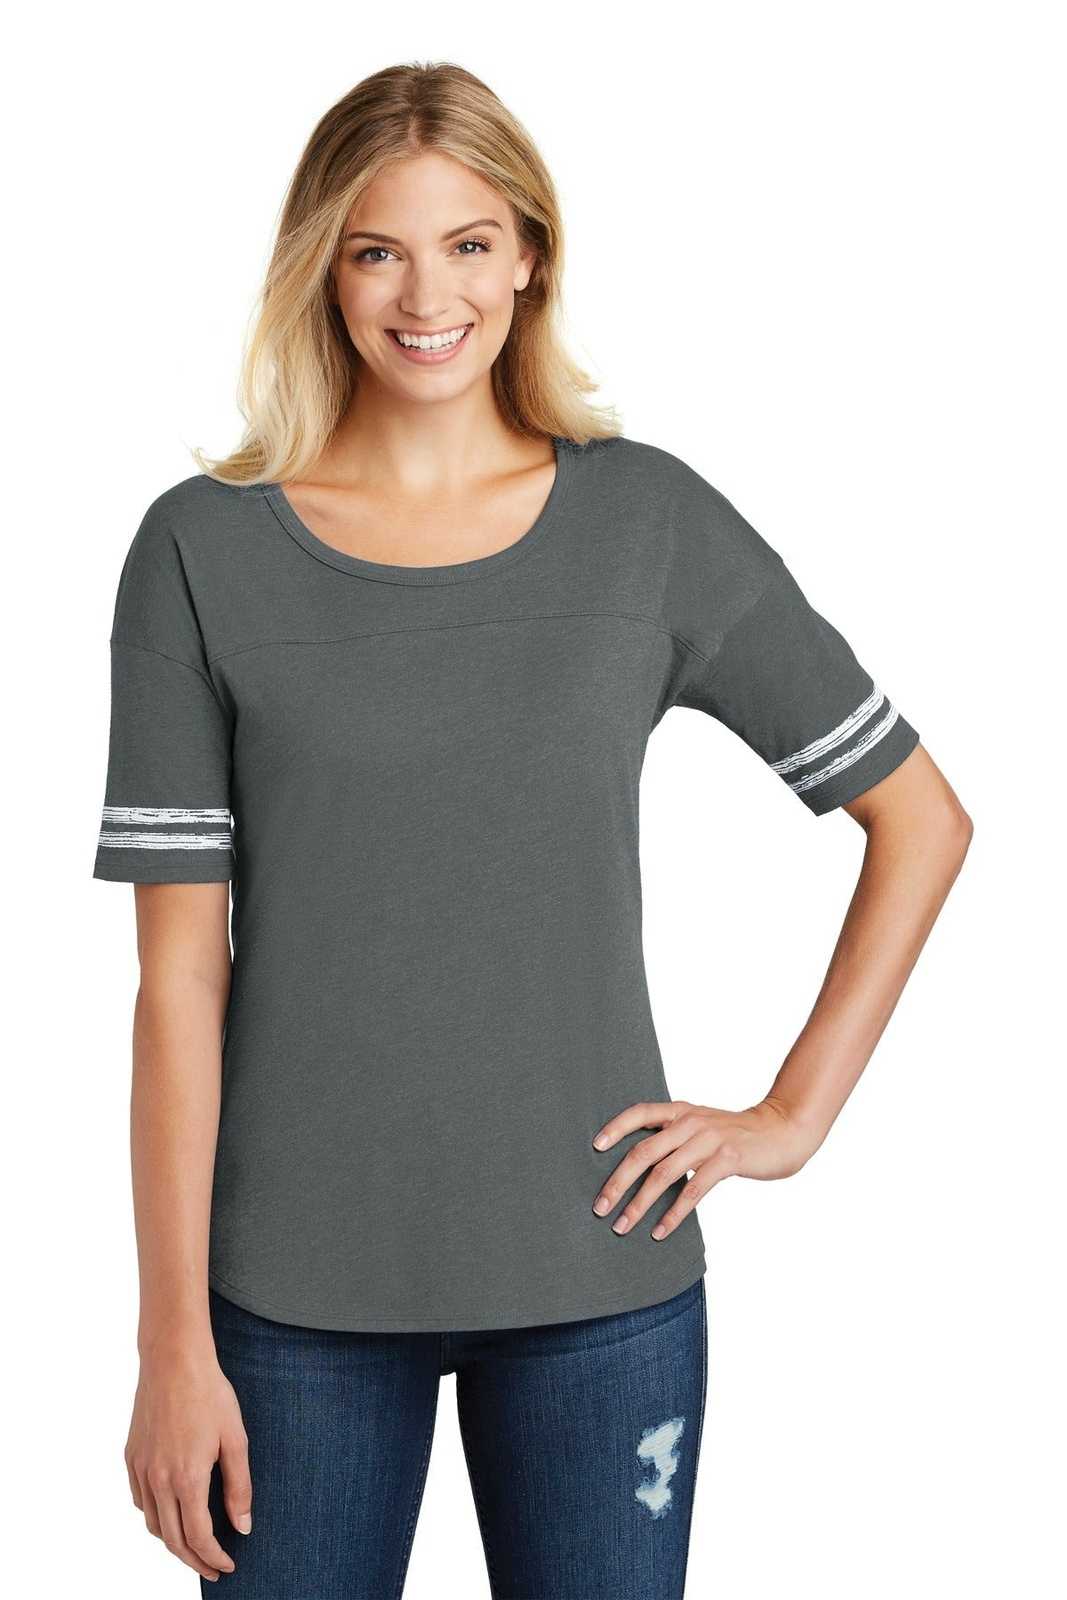 District DT487 Women's Scorecard Tee - Heathered Charcoal White - HIT a Double - 1